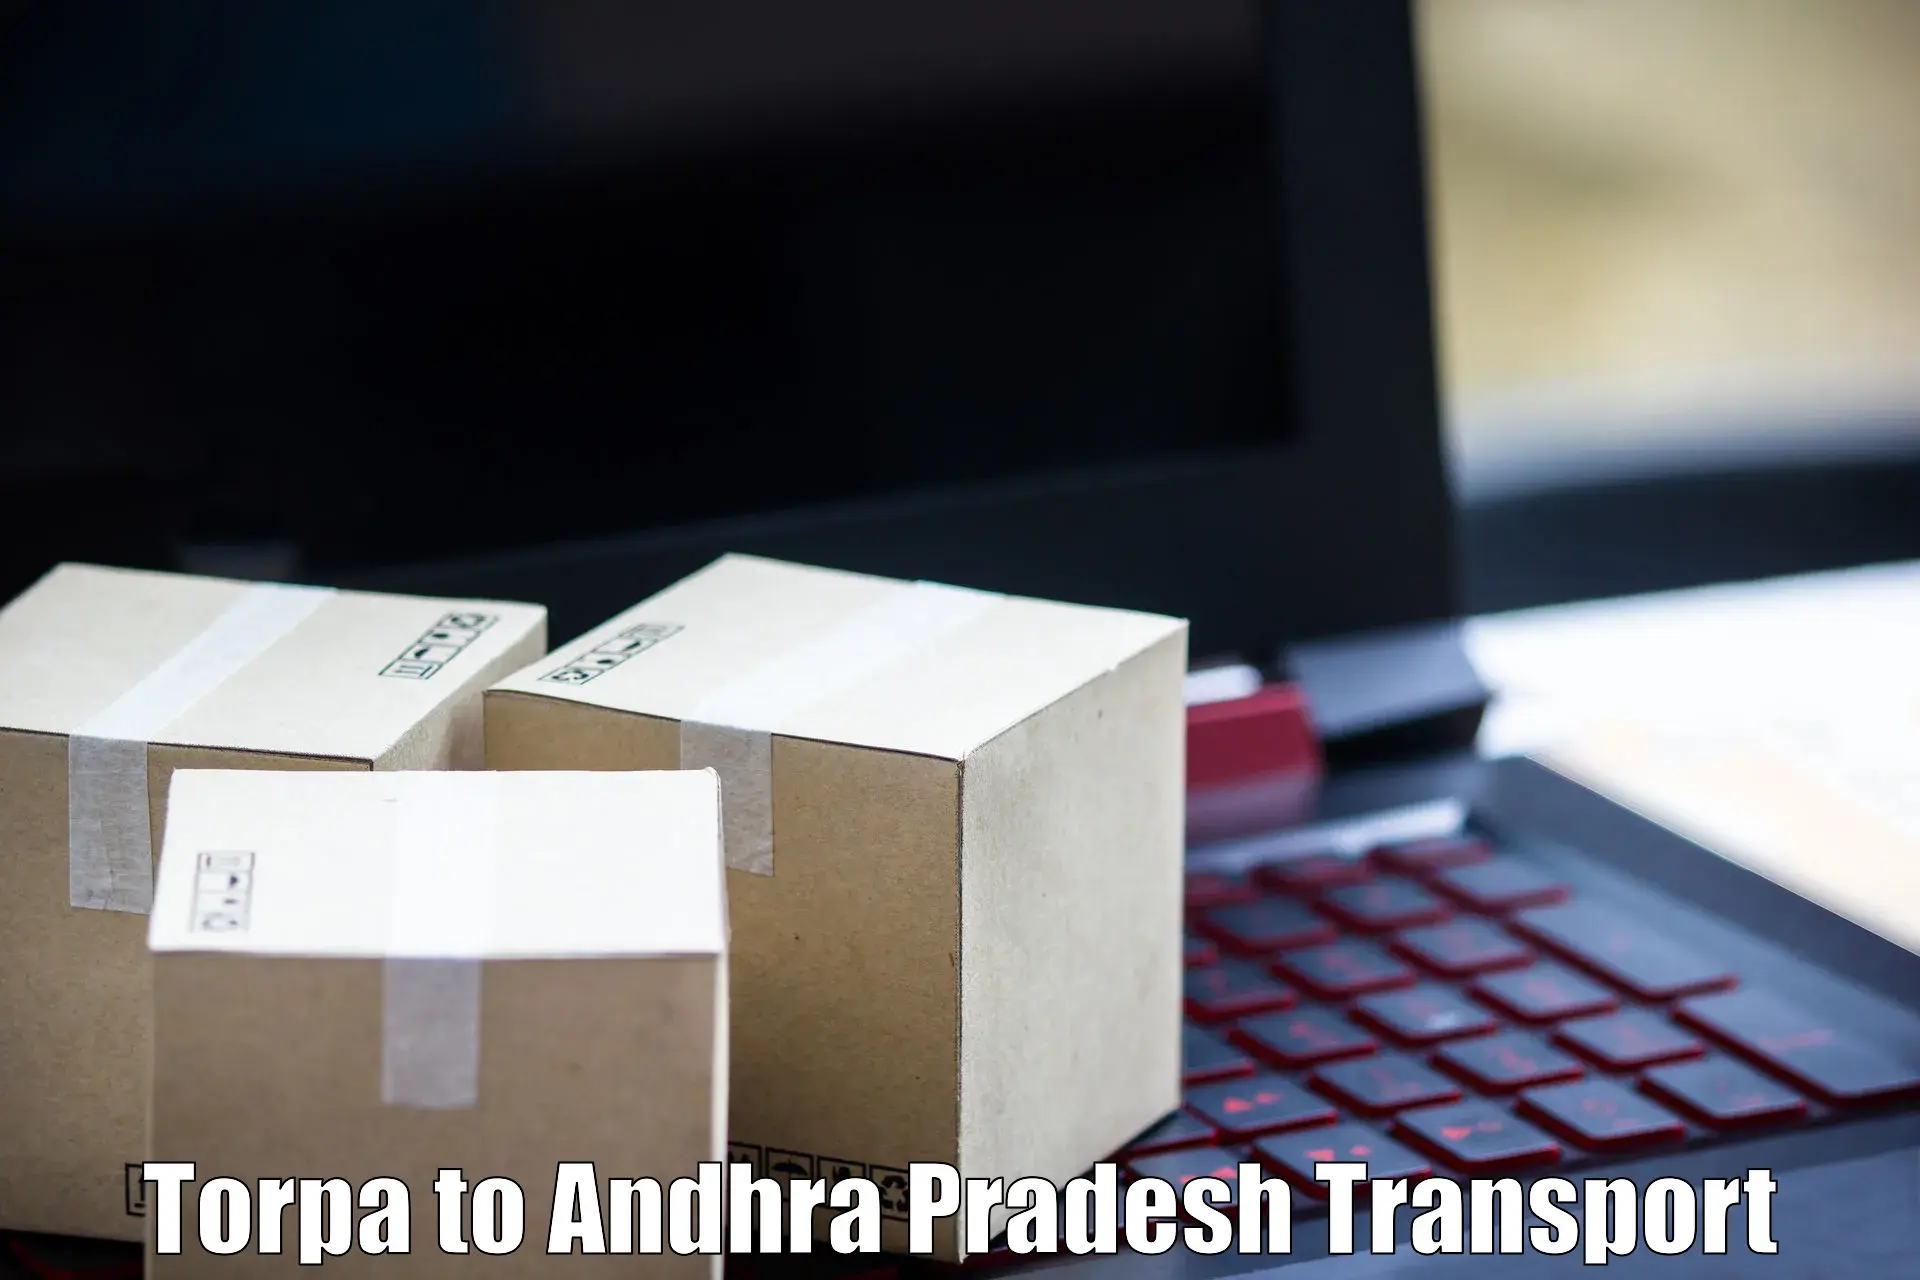 Part load transport service in India Torpa to Visakhapatnam Port